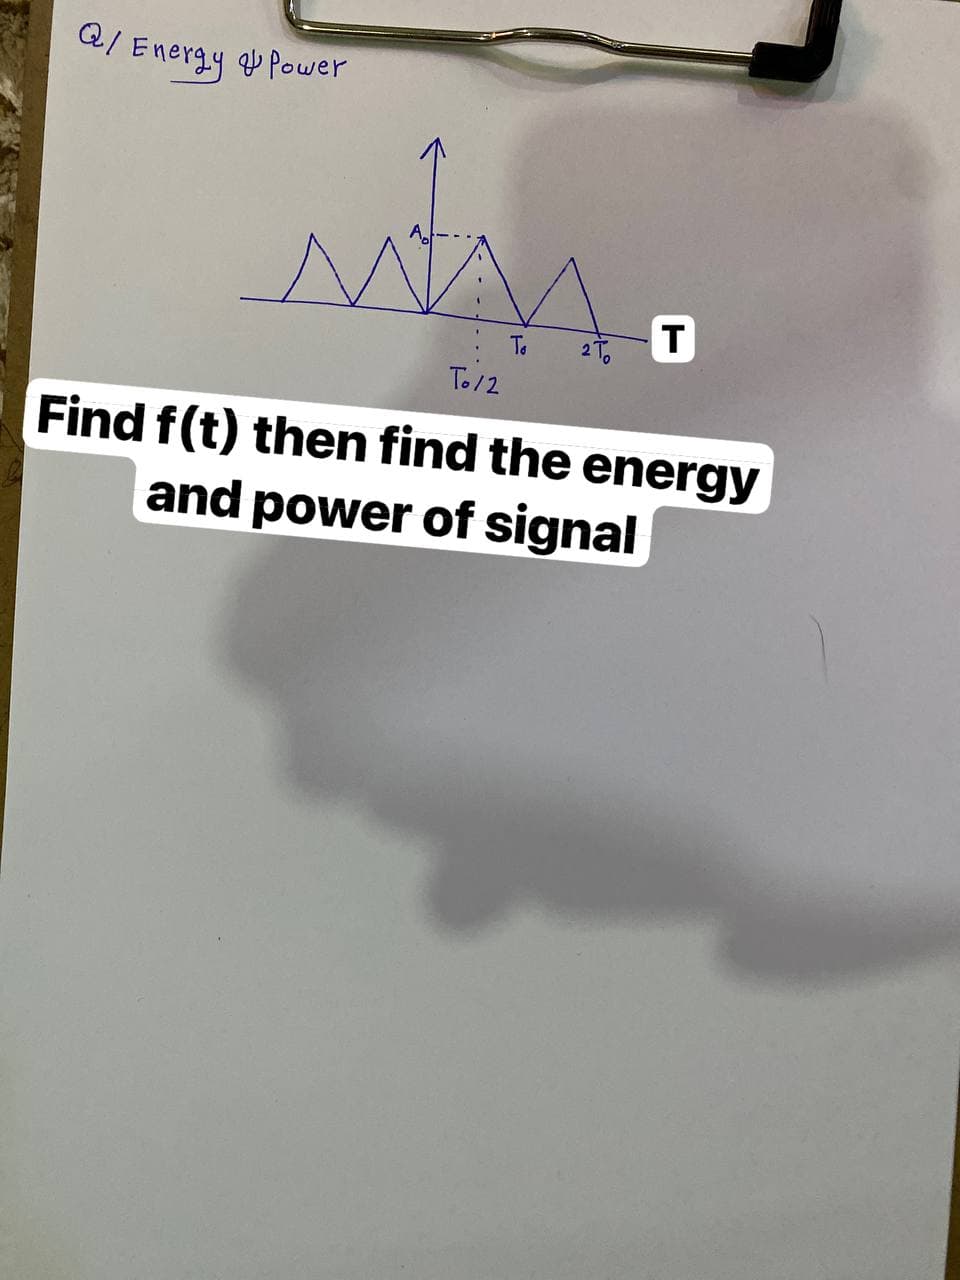 Q/ Energy Power
sty
To/2
To
2
T
Find f(t) then find the energy
and power of signal